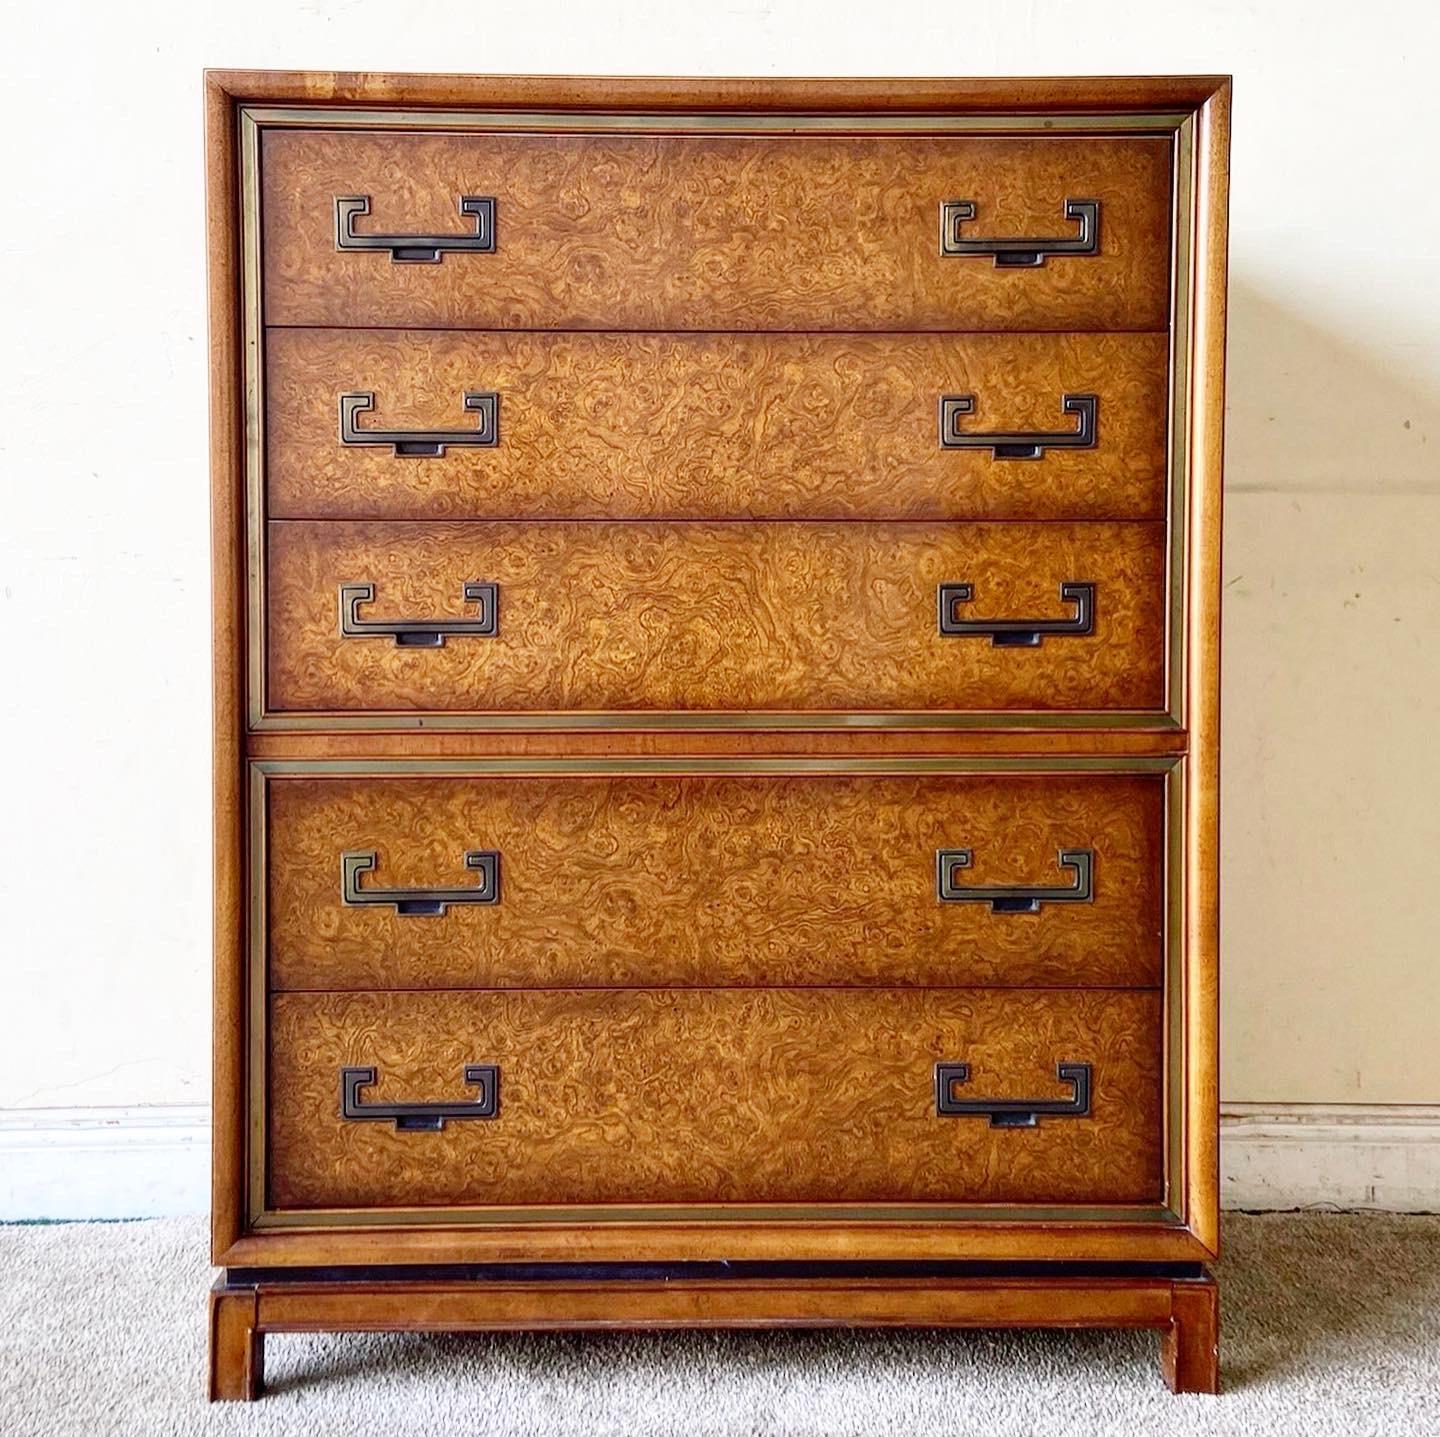 Exceptional mid-century chinoiserie highboy by Founders. Features a Burl wood veneer with brass inlaid drawer pulls.
 